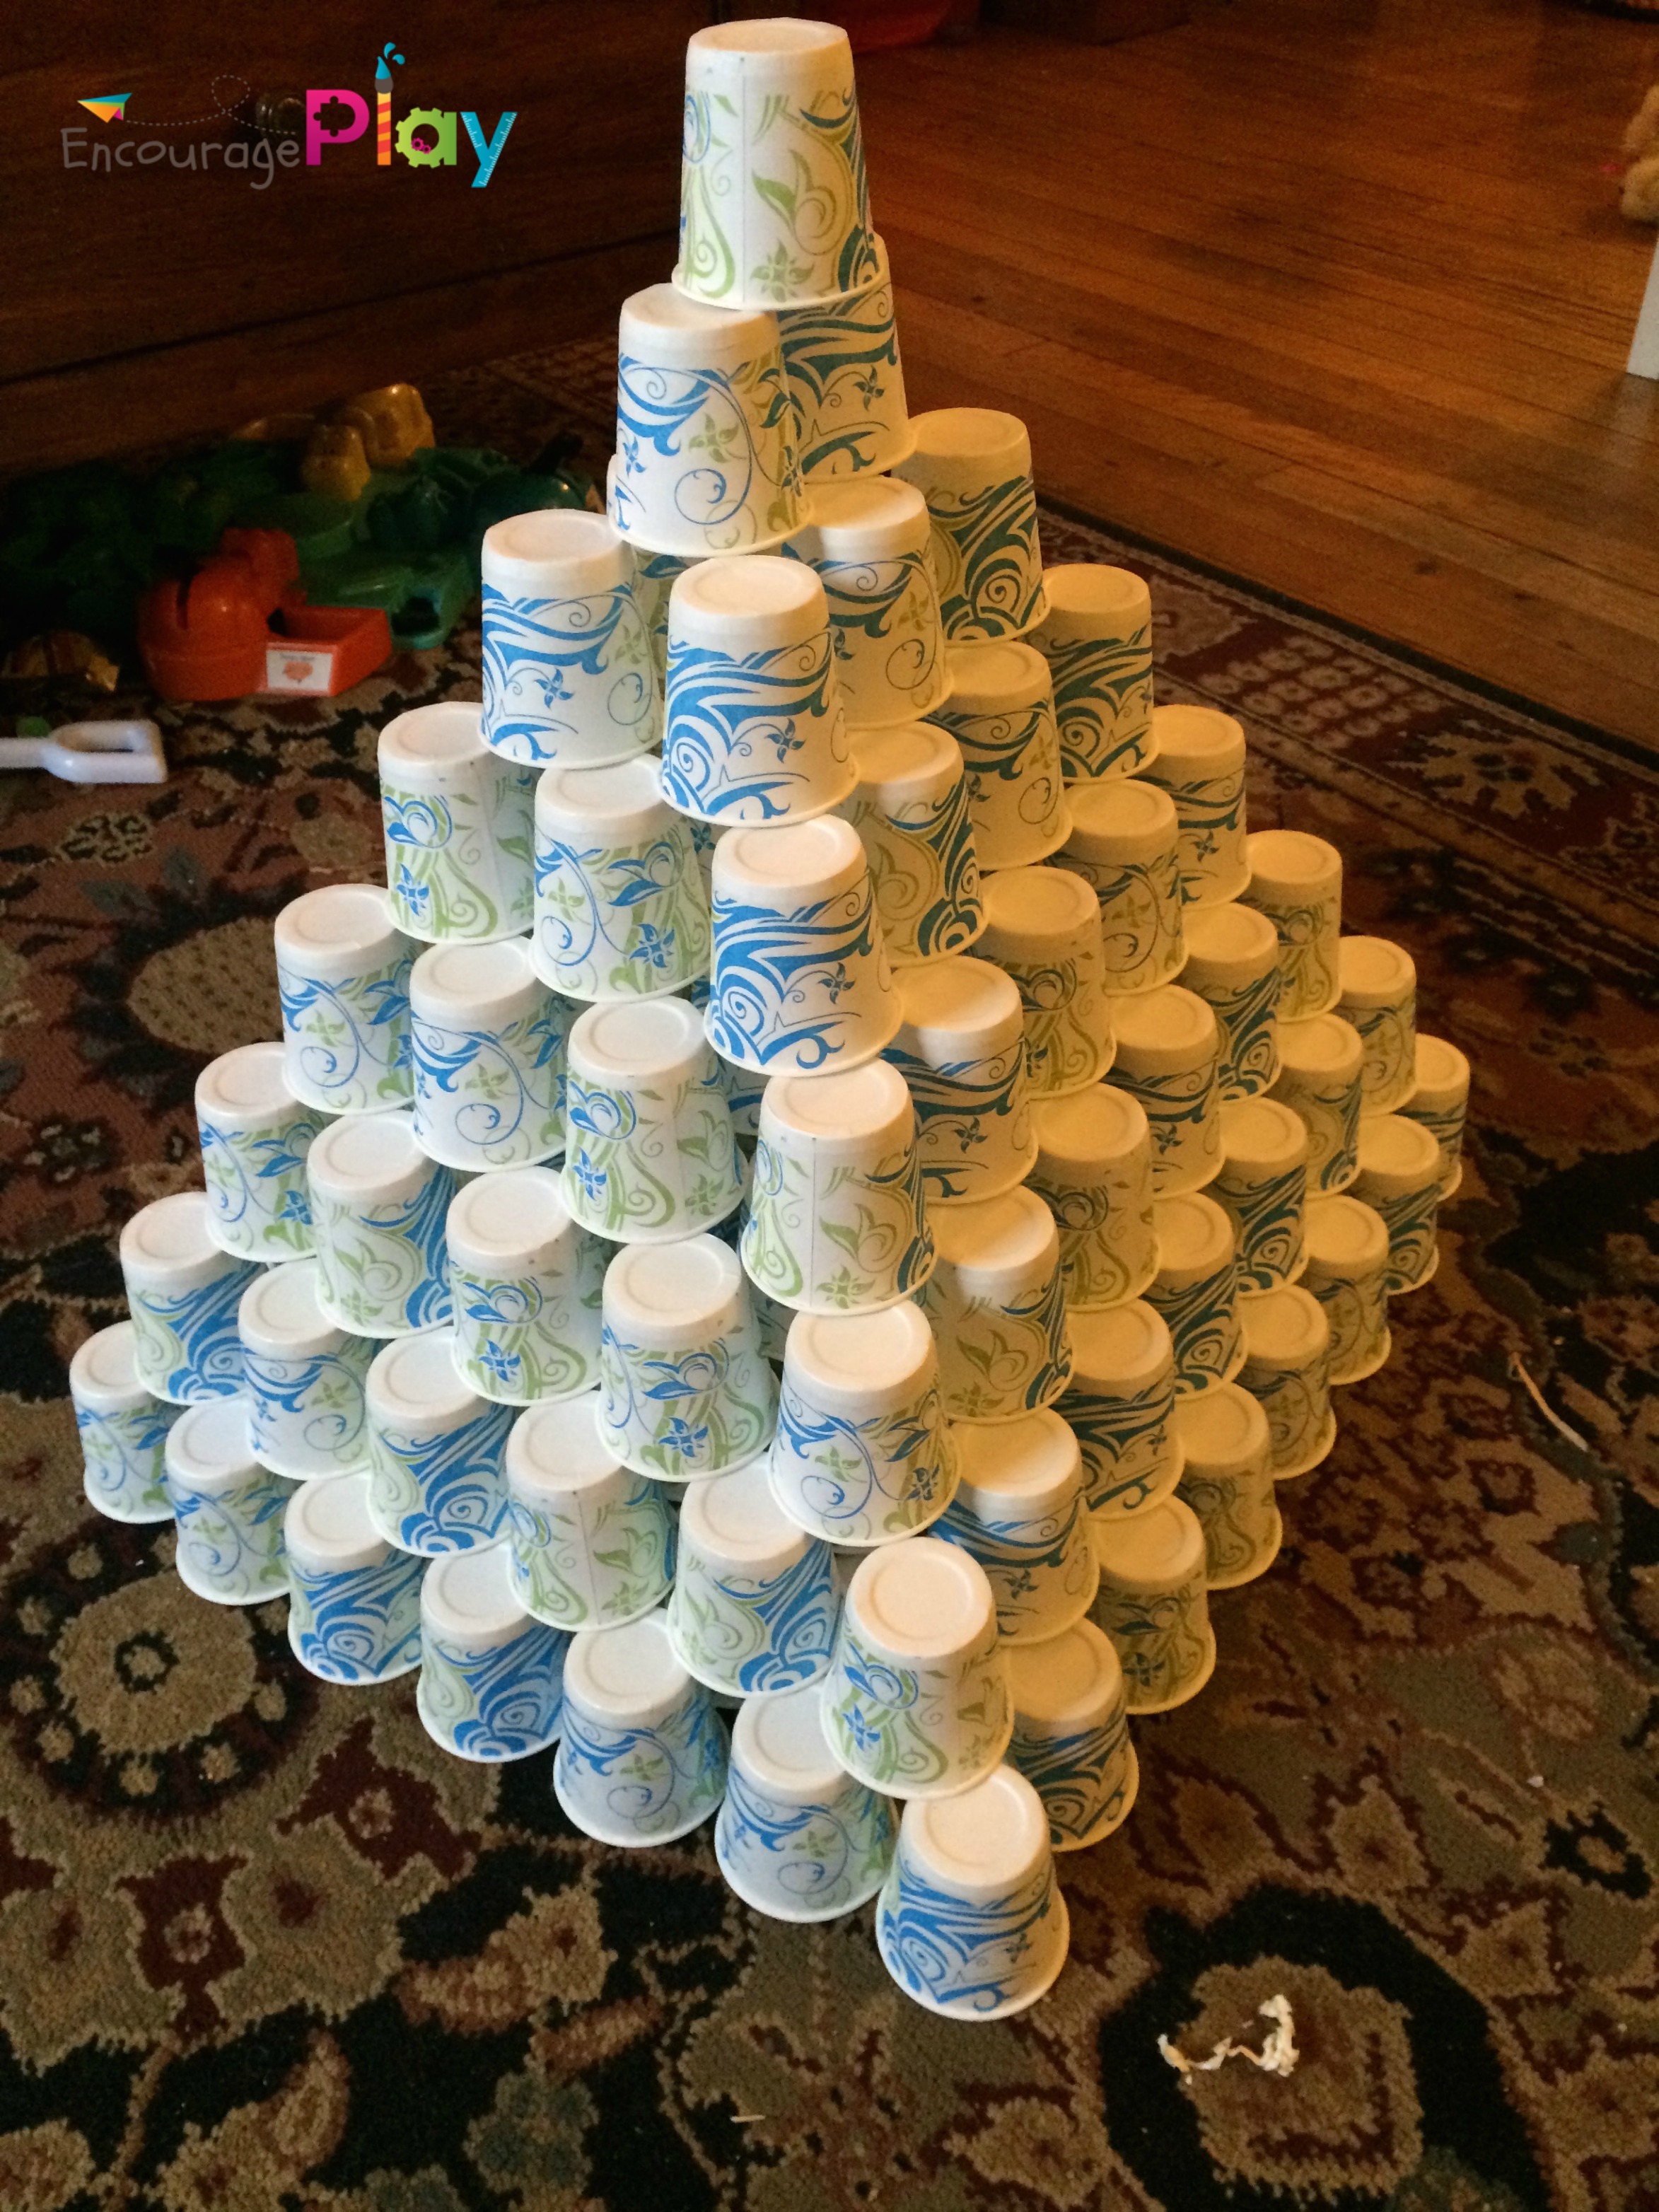 pyramid of cups from Encourage Play.jpg